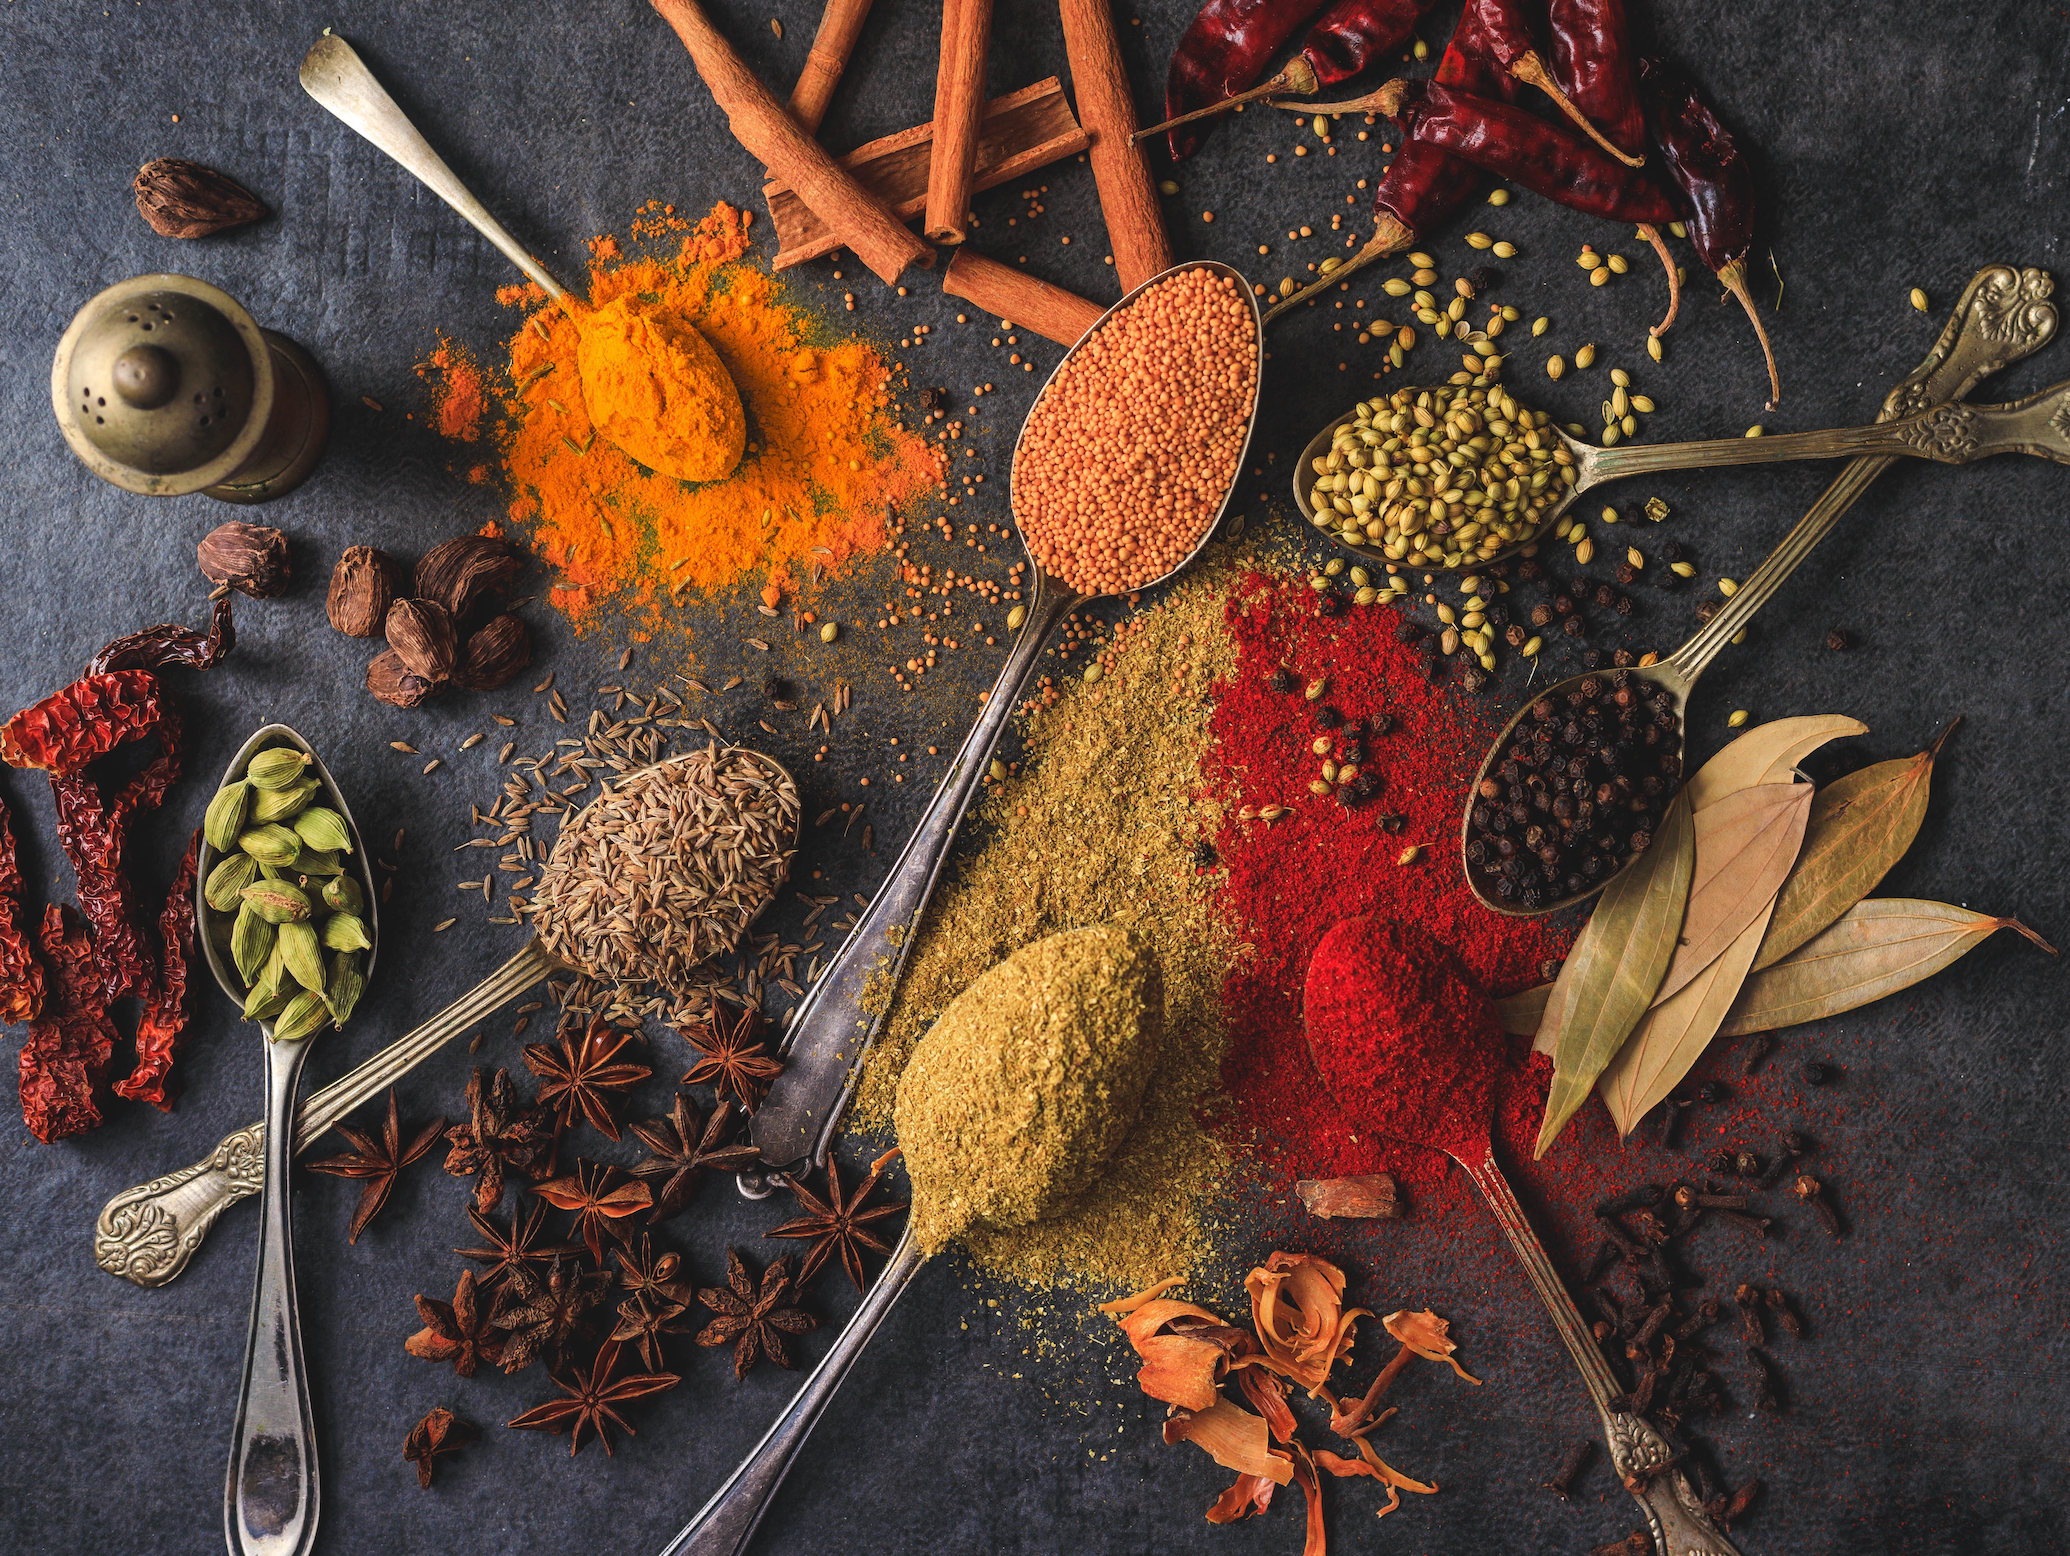 Spoonfuls of different colorful herbs and spices are on a dark wood table as examples of superfoods